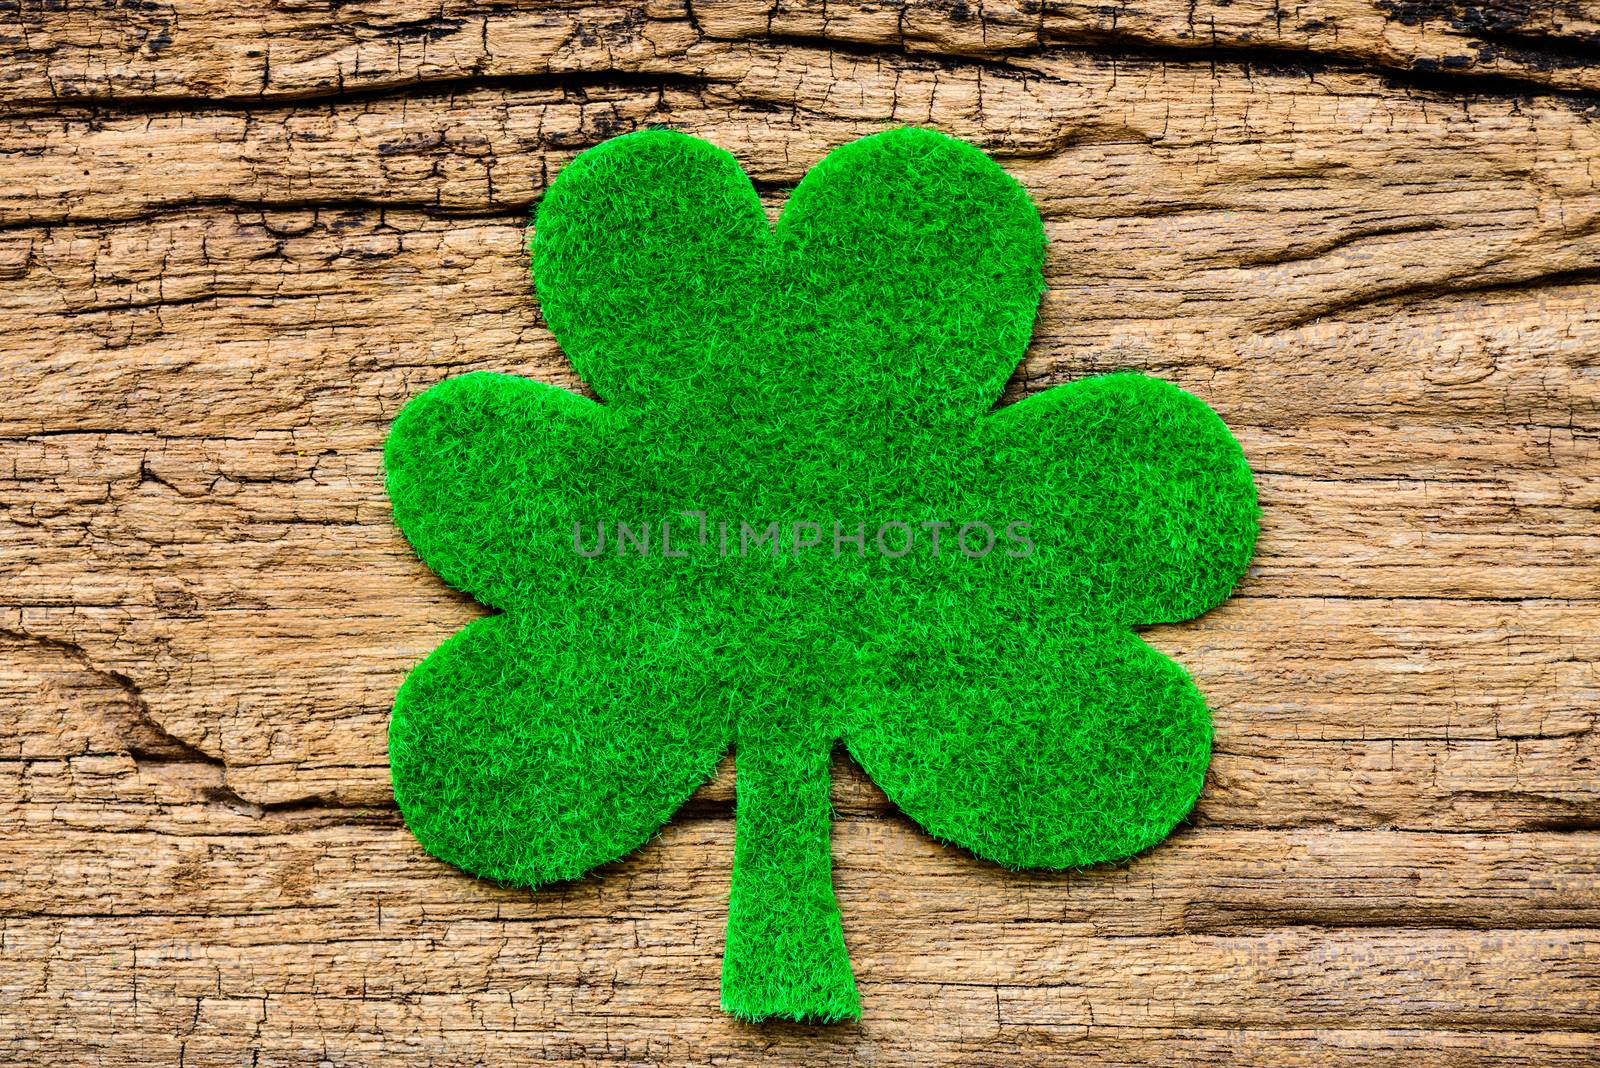 Happy St Patricks Day message with green clover leaf on wooden background